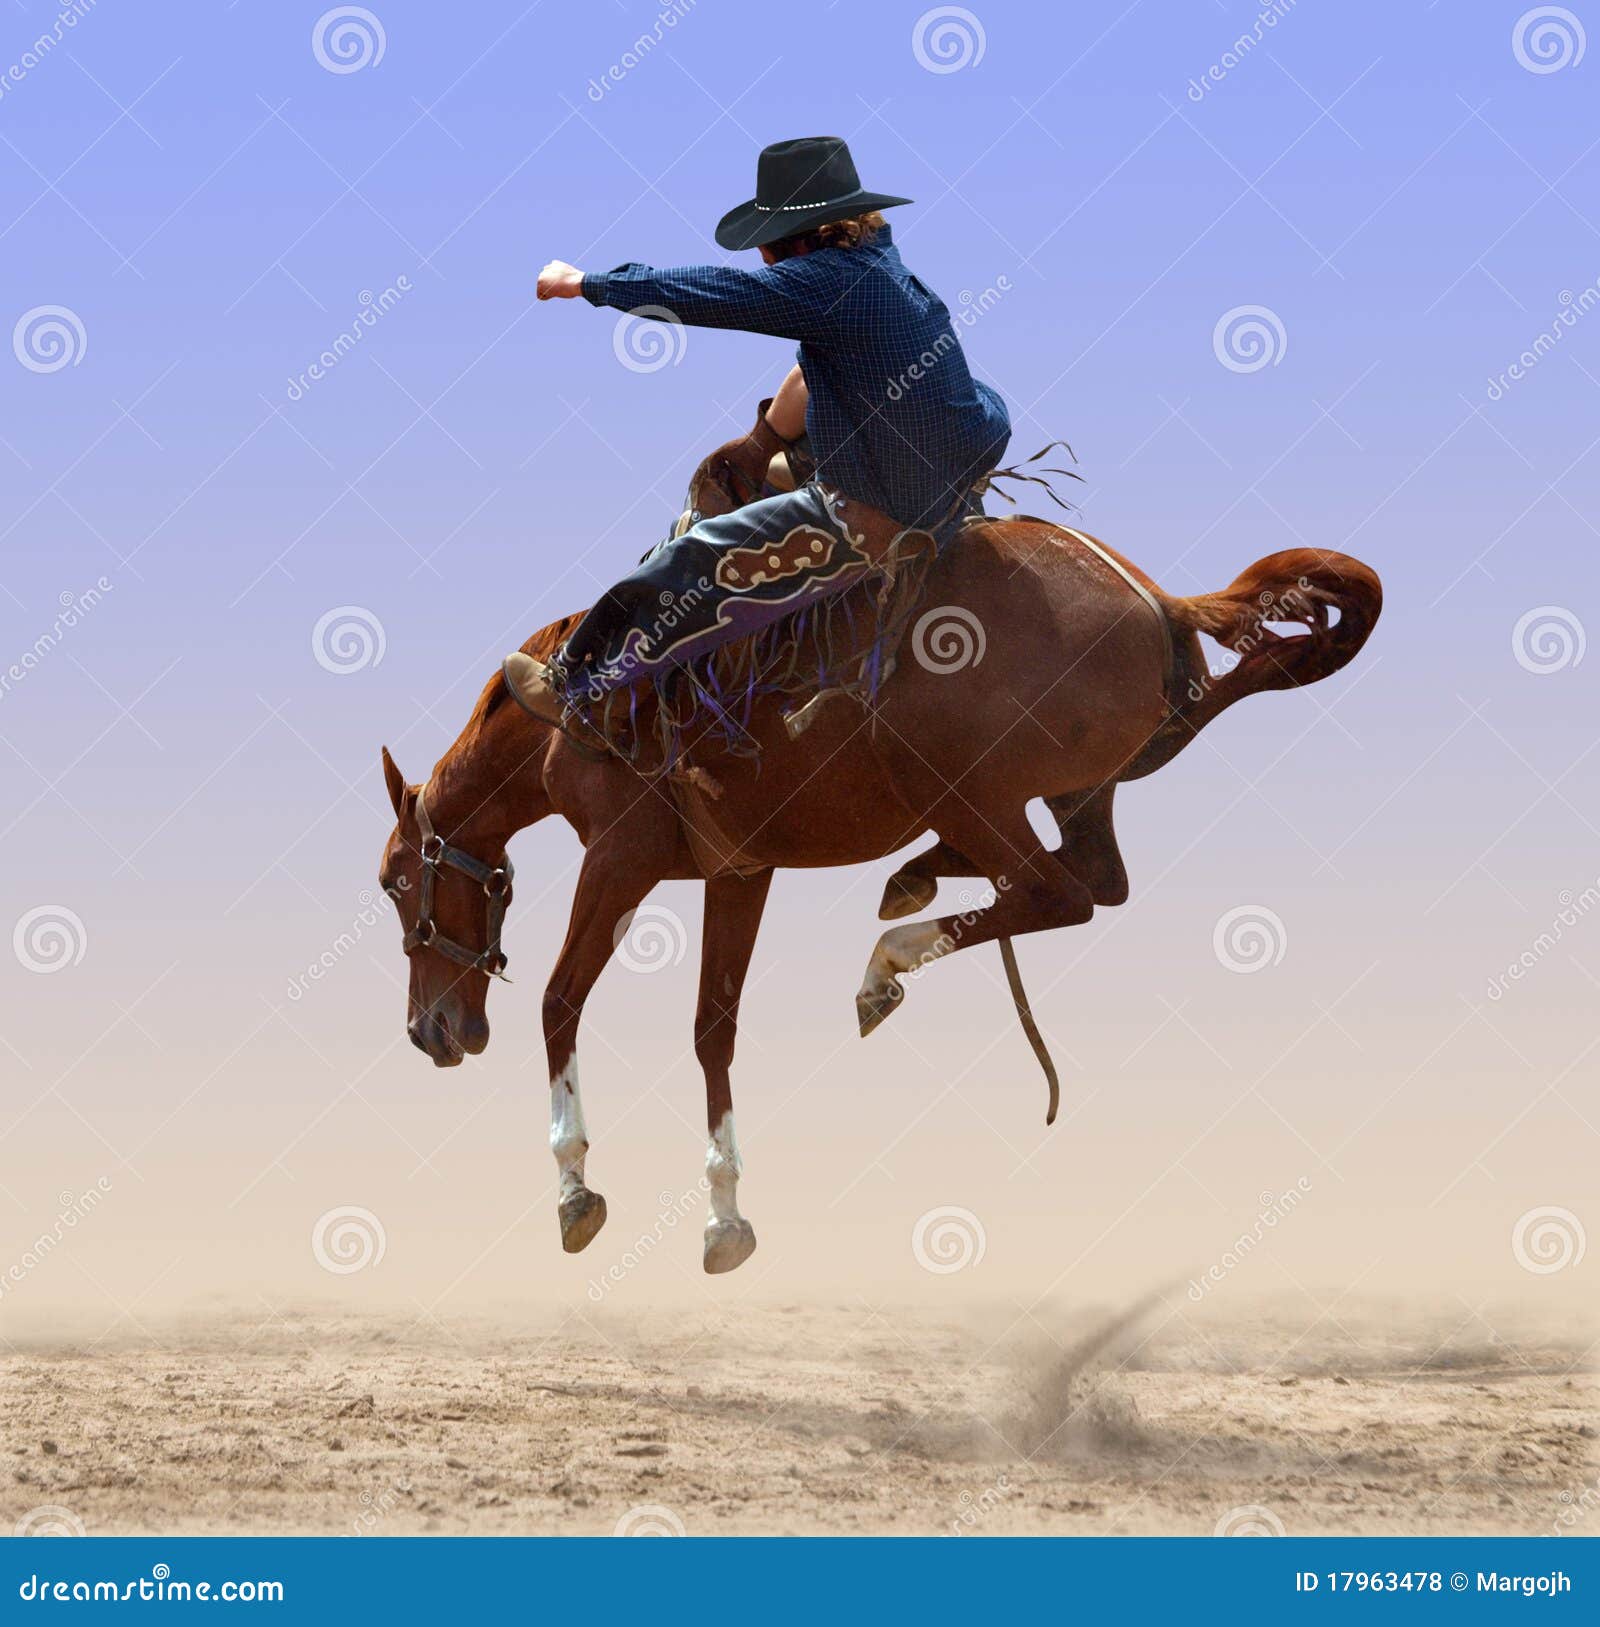 Airborne Rodeo Bronco stock photo. Image of dirty, bucked - 17963478